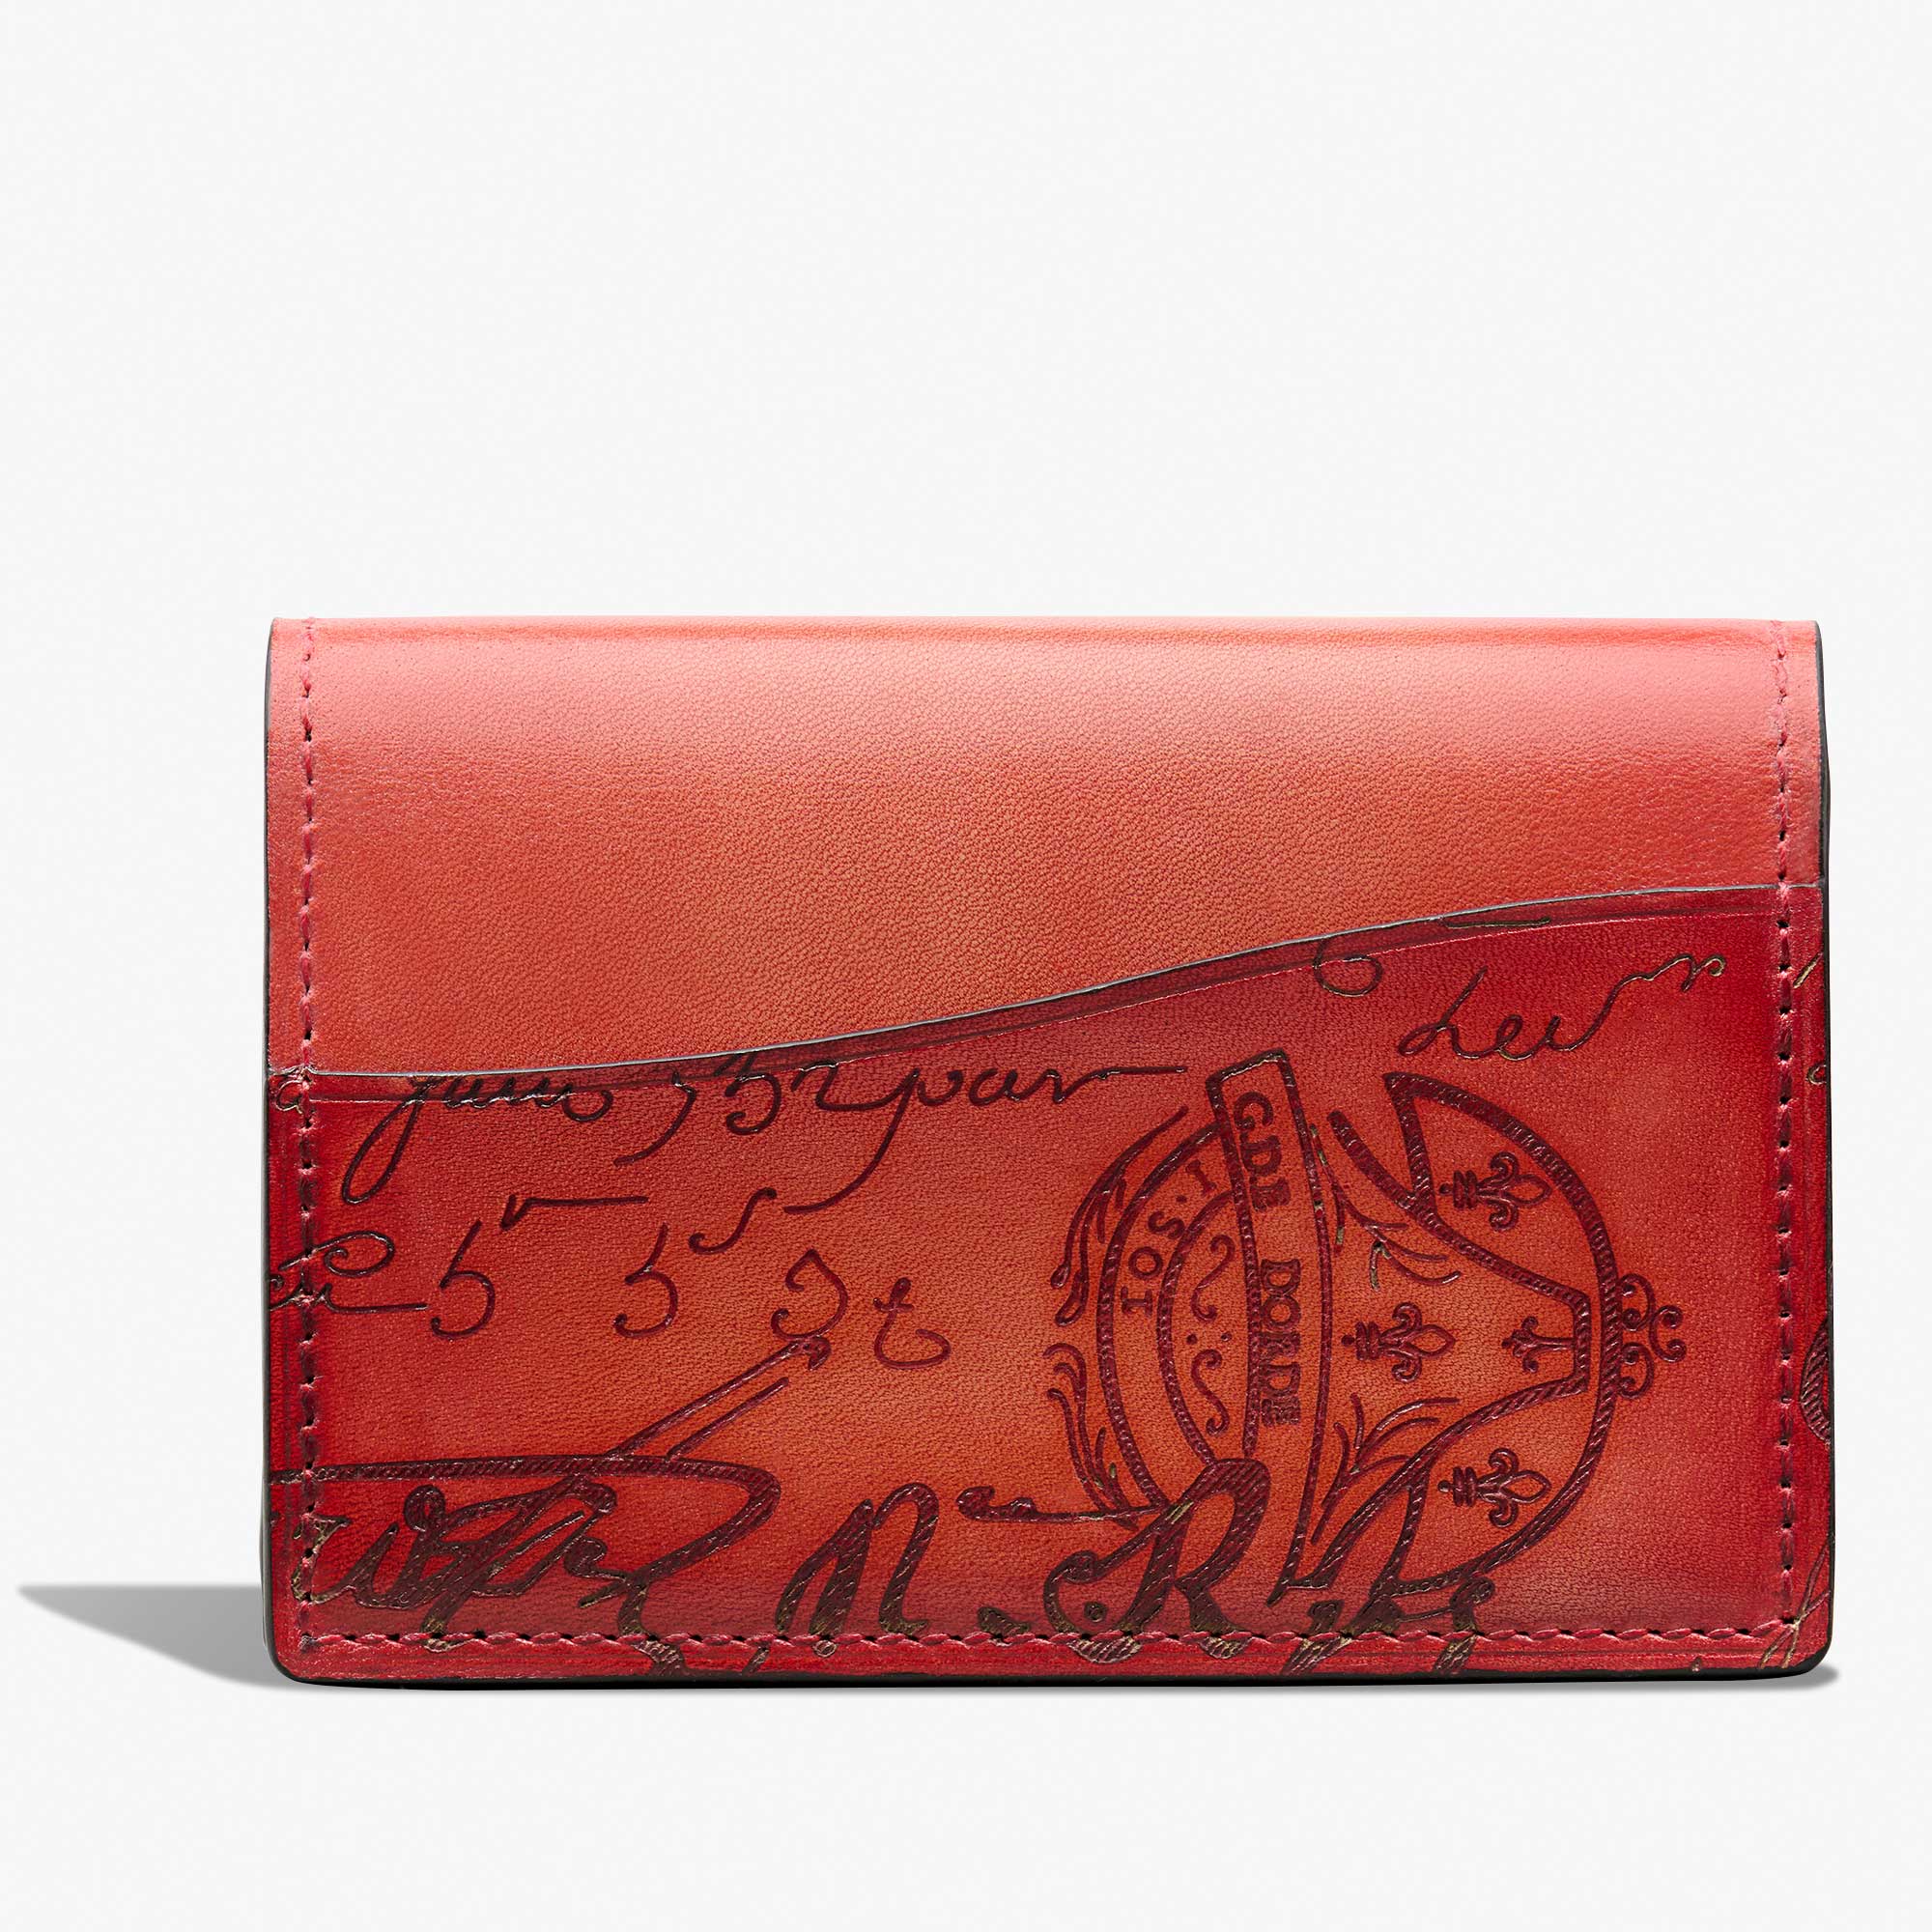 Imbuia Scritto Leather Card Holder, TANGERINE, hi-res